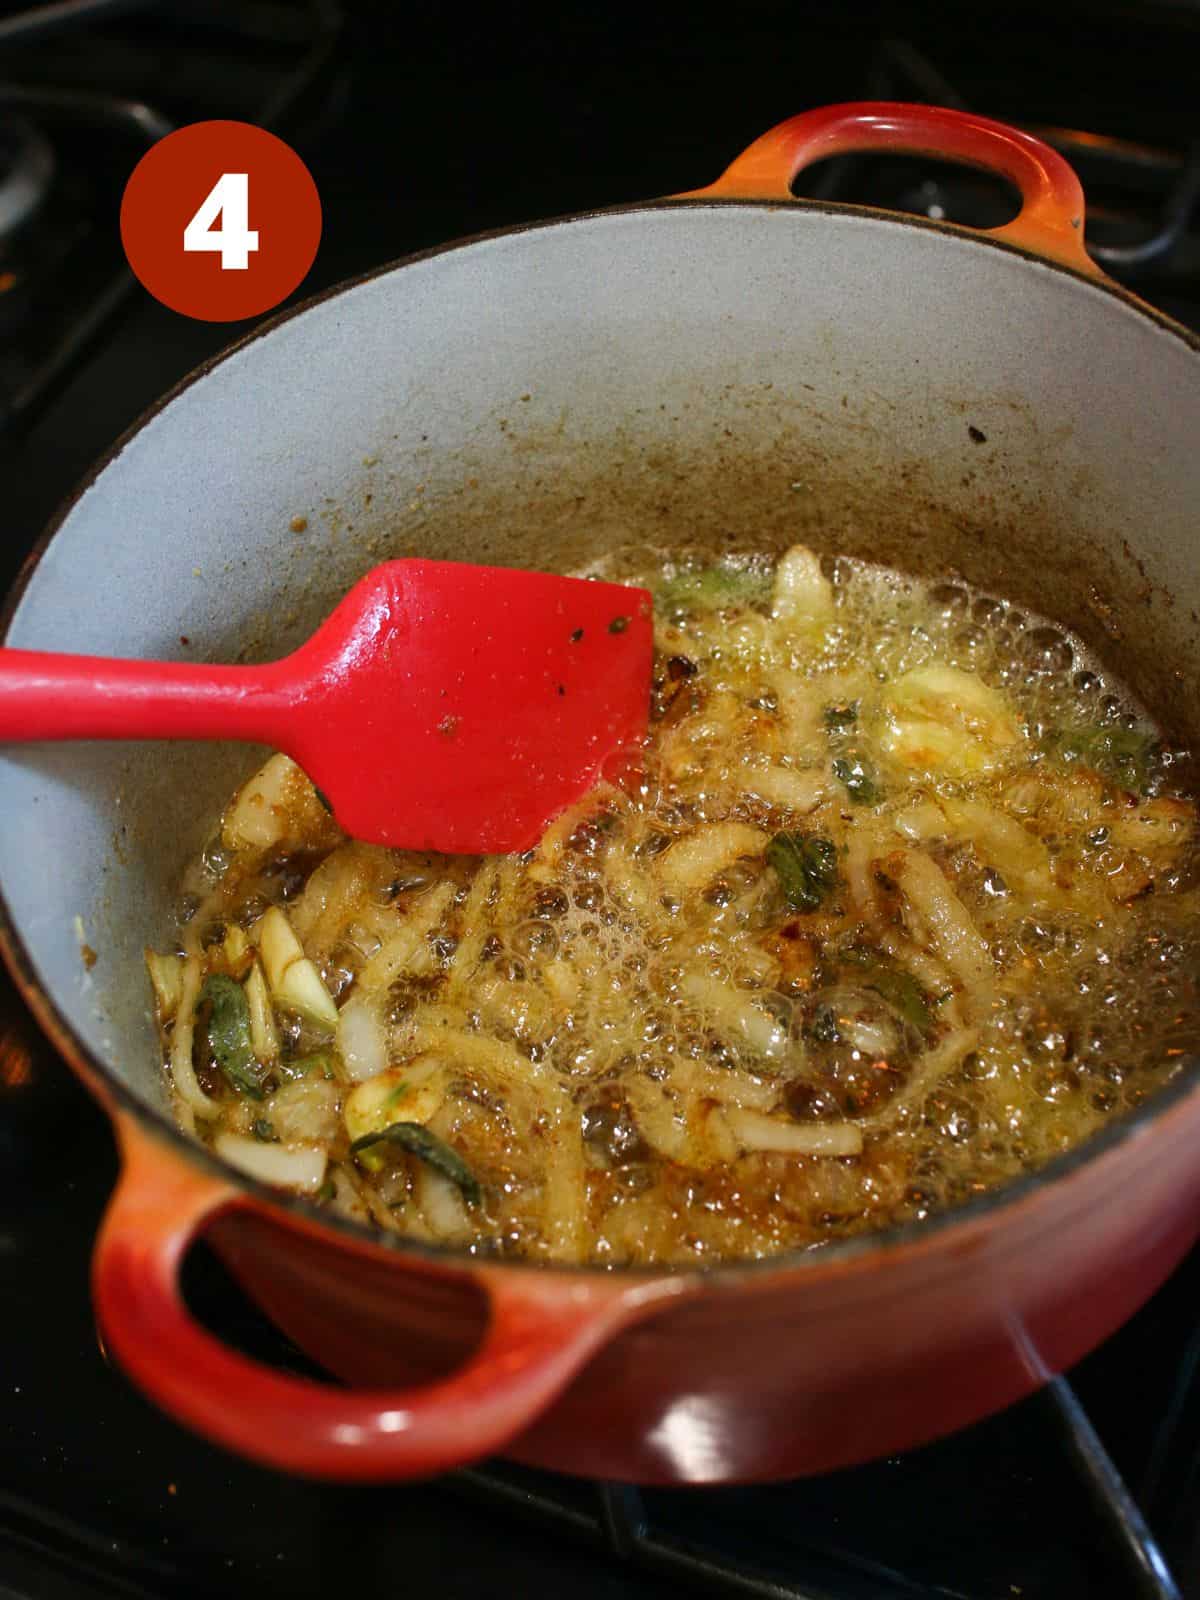 A small red dutch oven on the stove with sliced onions, oil, fresh sage and thyme, crushed garlic, pepper and chili flakes all mixed together with lots of butter bubbling. A red silicone spatula mixing the onions together. In the upper left corner is a '4' in a dark red circle.